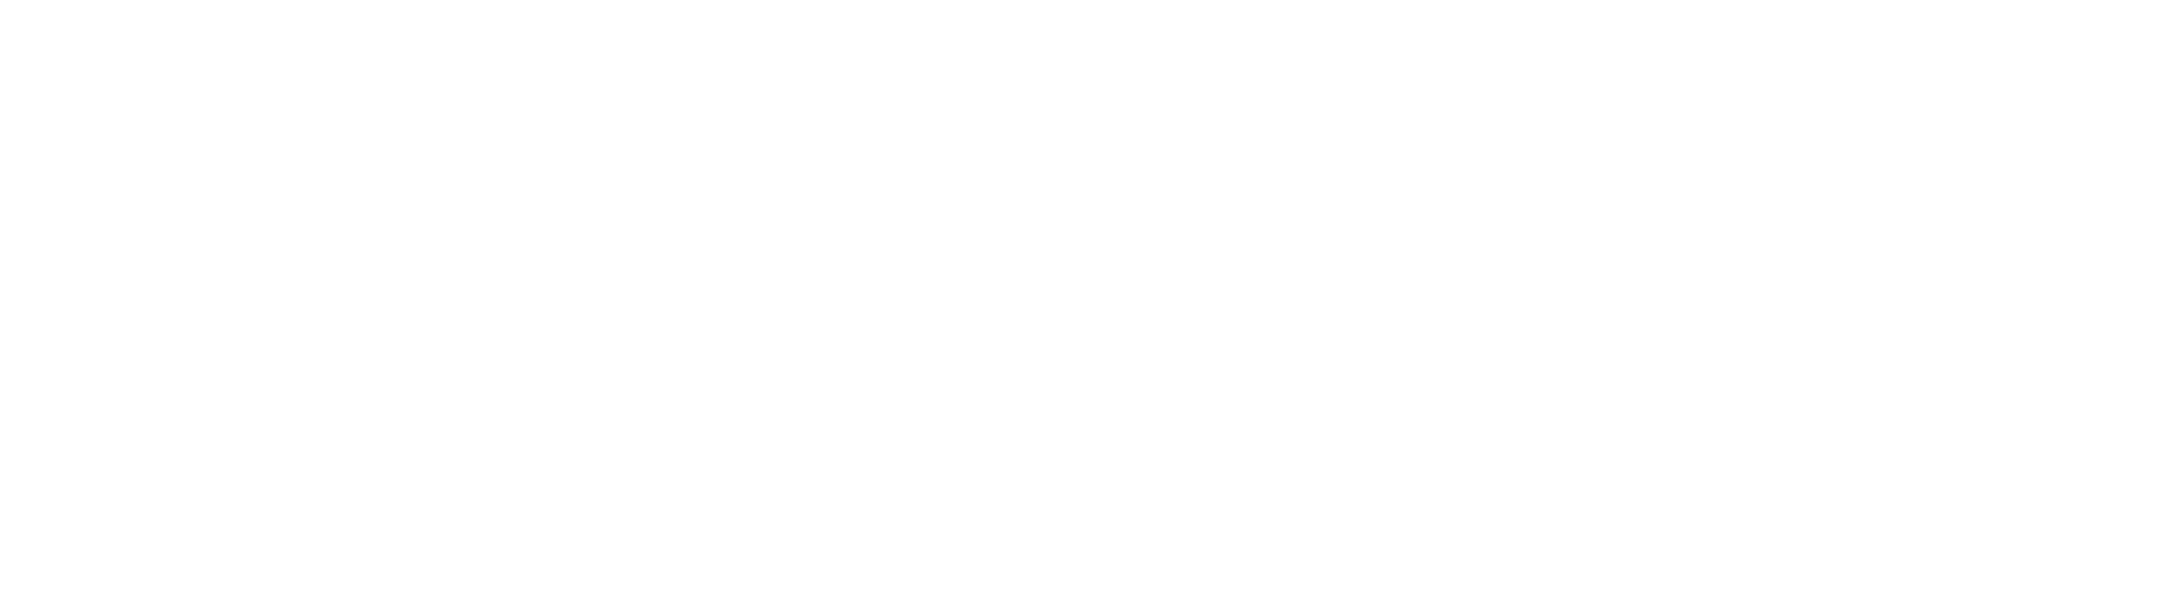 advanced people strategy white